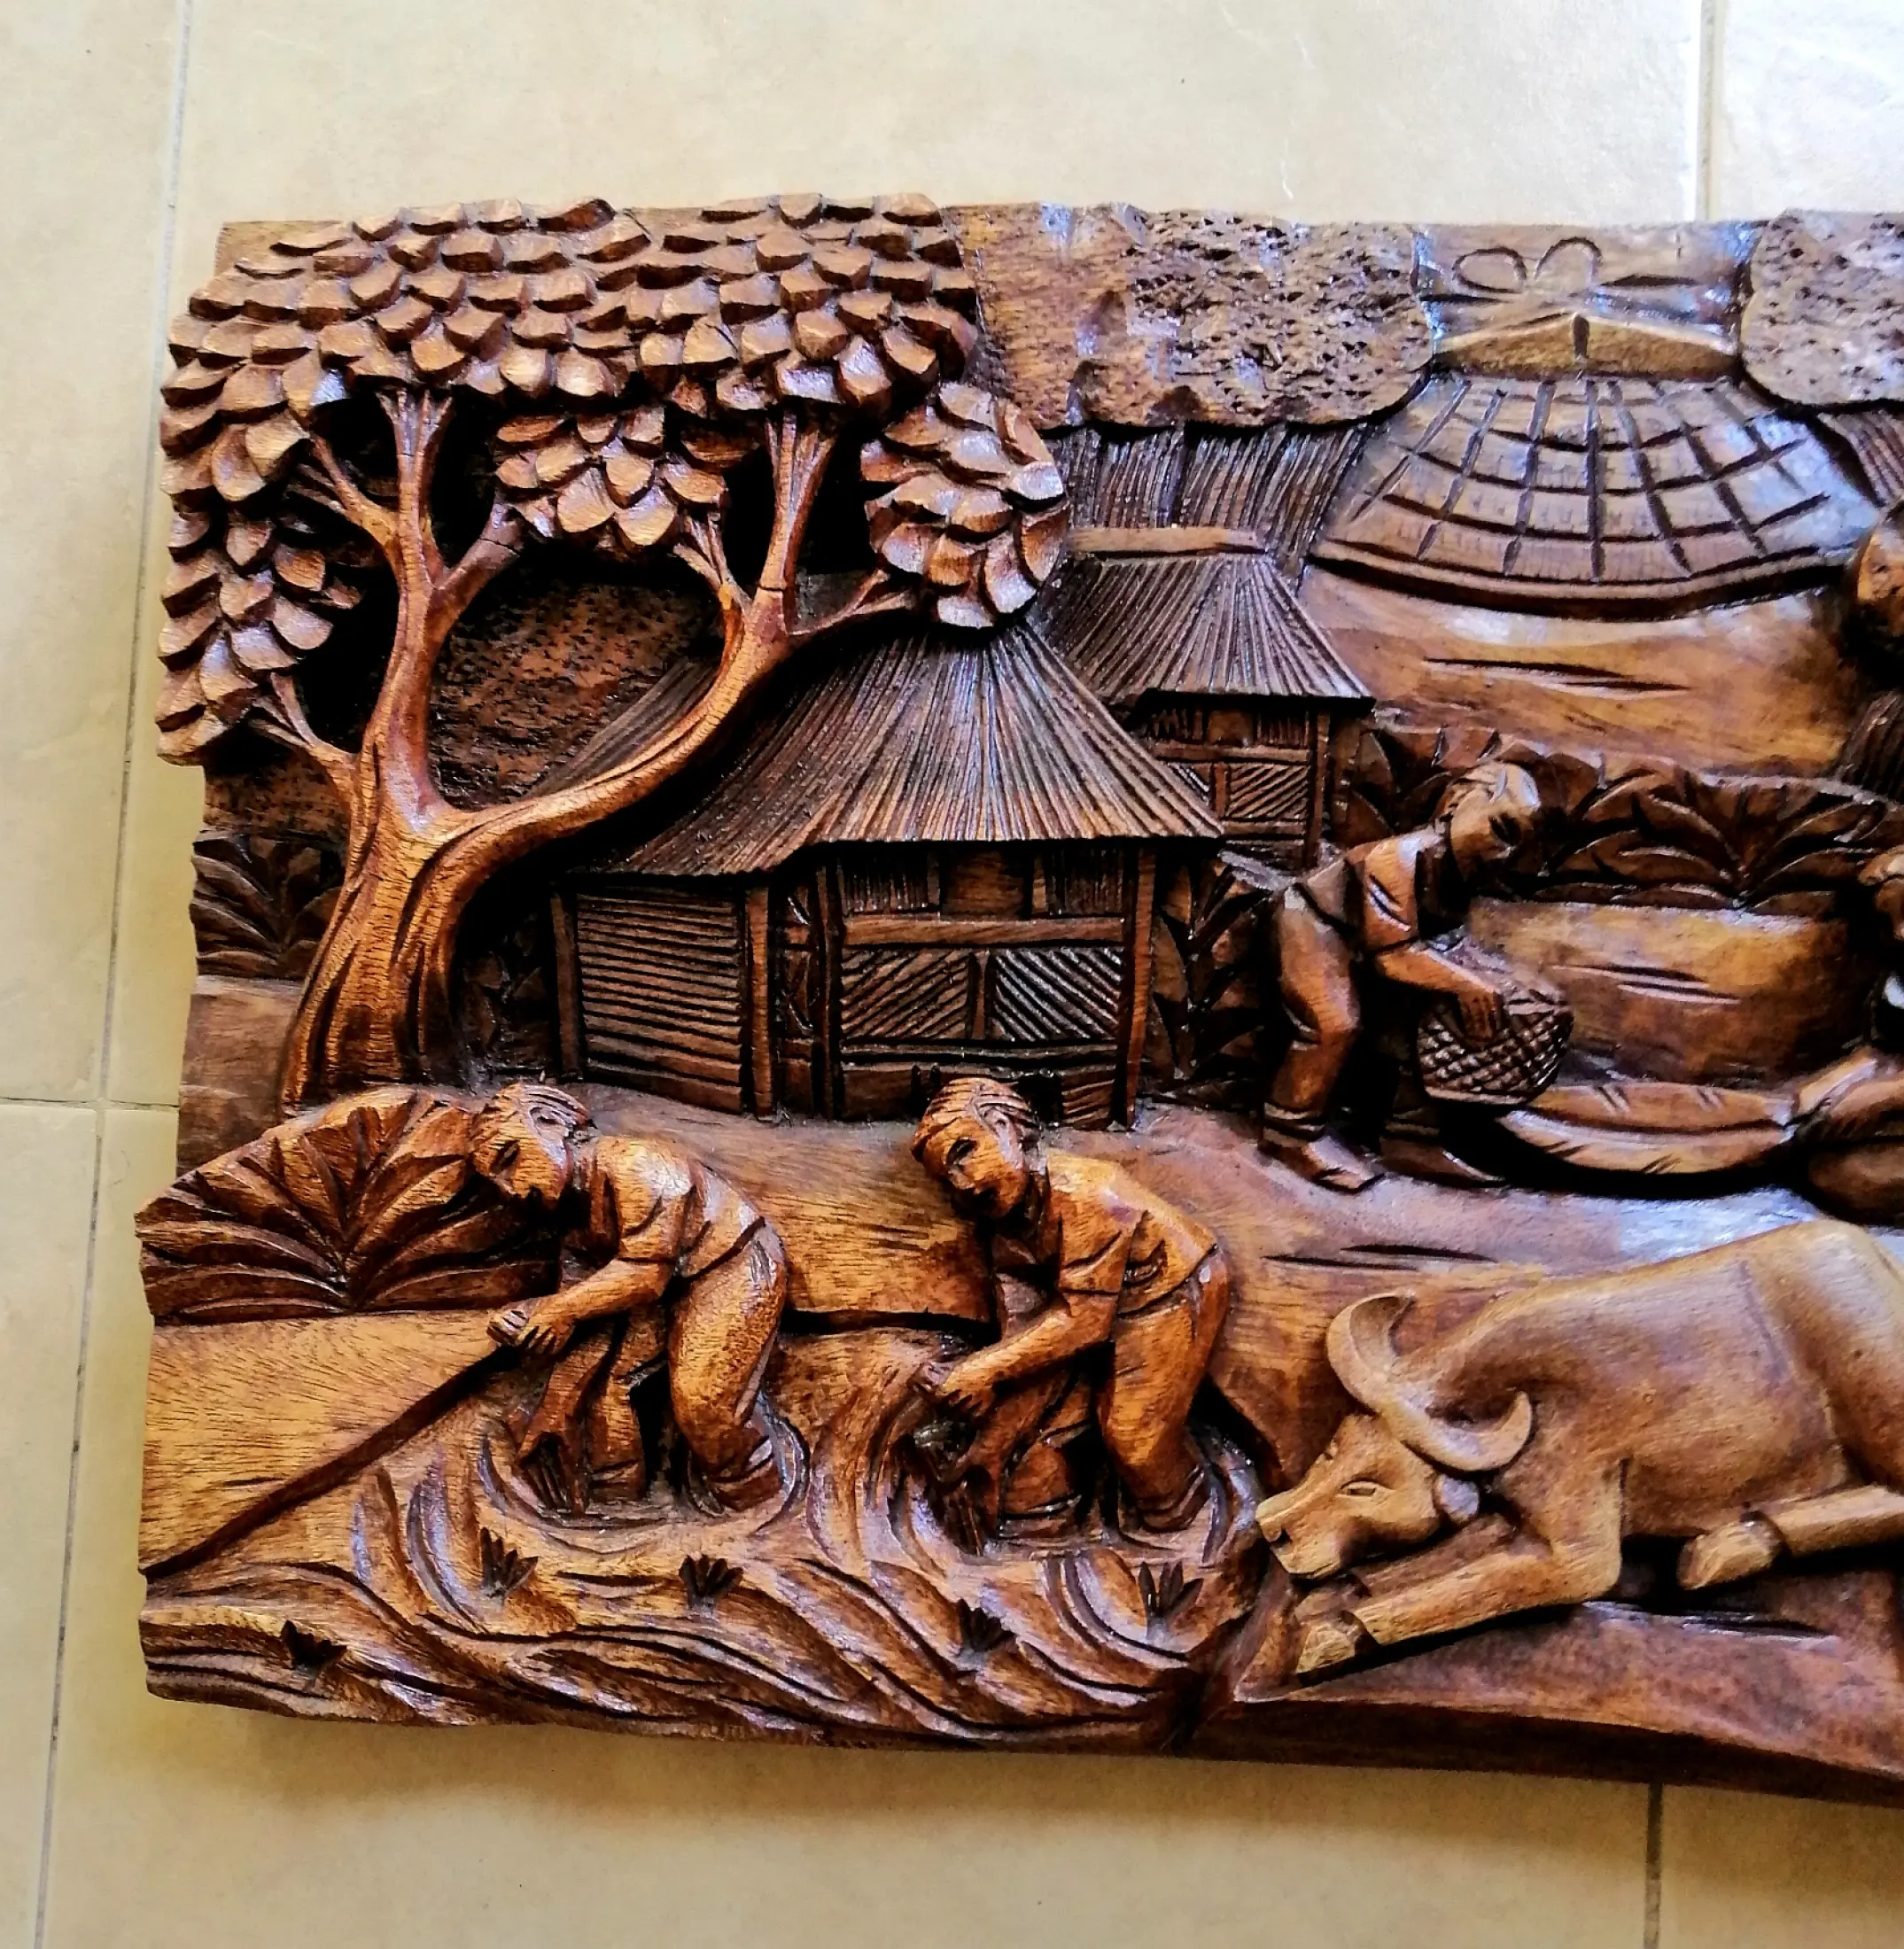 Planting Rice Is Fun Carved In Solid Mahogany Wood A Wall Decor That Teaches History And Shows The Diligence And Industry Of The Filipinos Crafted In Paete Laguna The Carving Capital Of